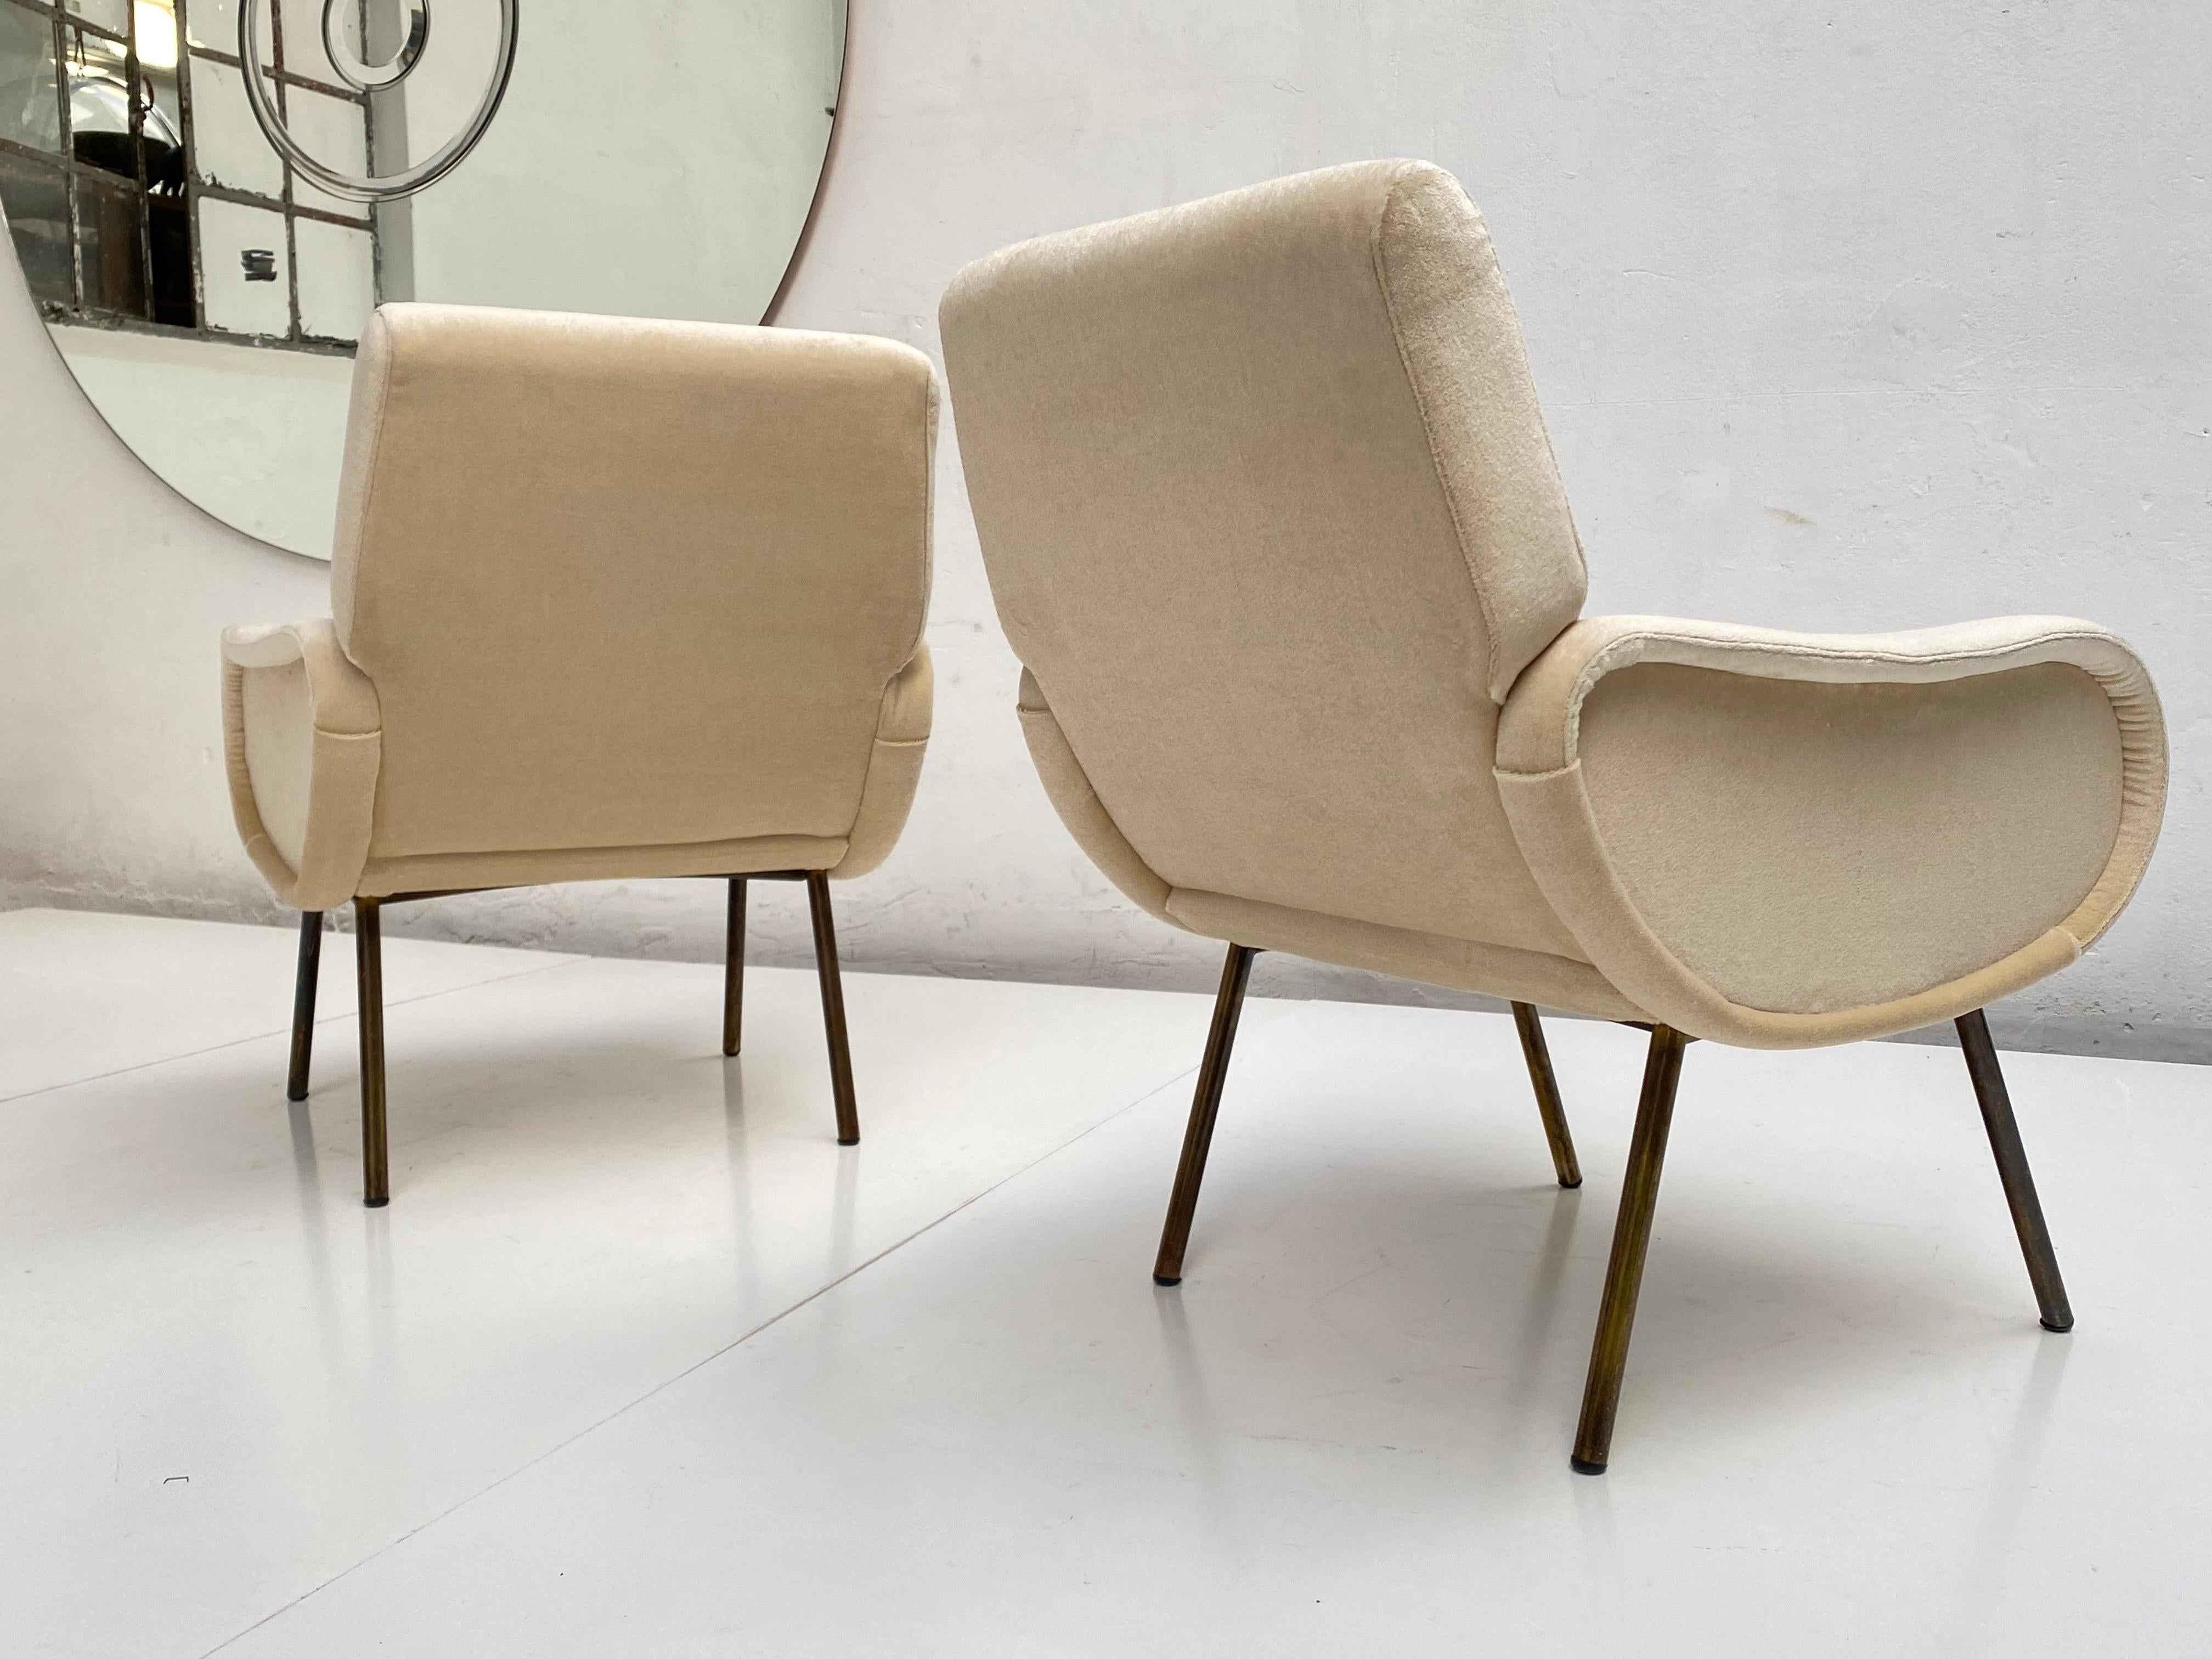 Rubber Zanuso Mohair 'Baby' Lounge Chairs, Early Wood Frames, Brass Legs, Arflex, 1951 For Sale